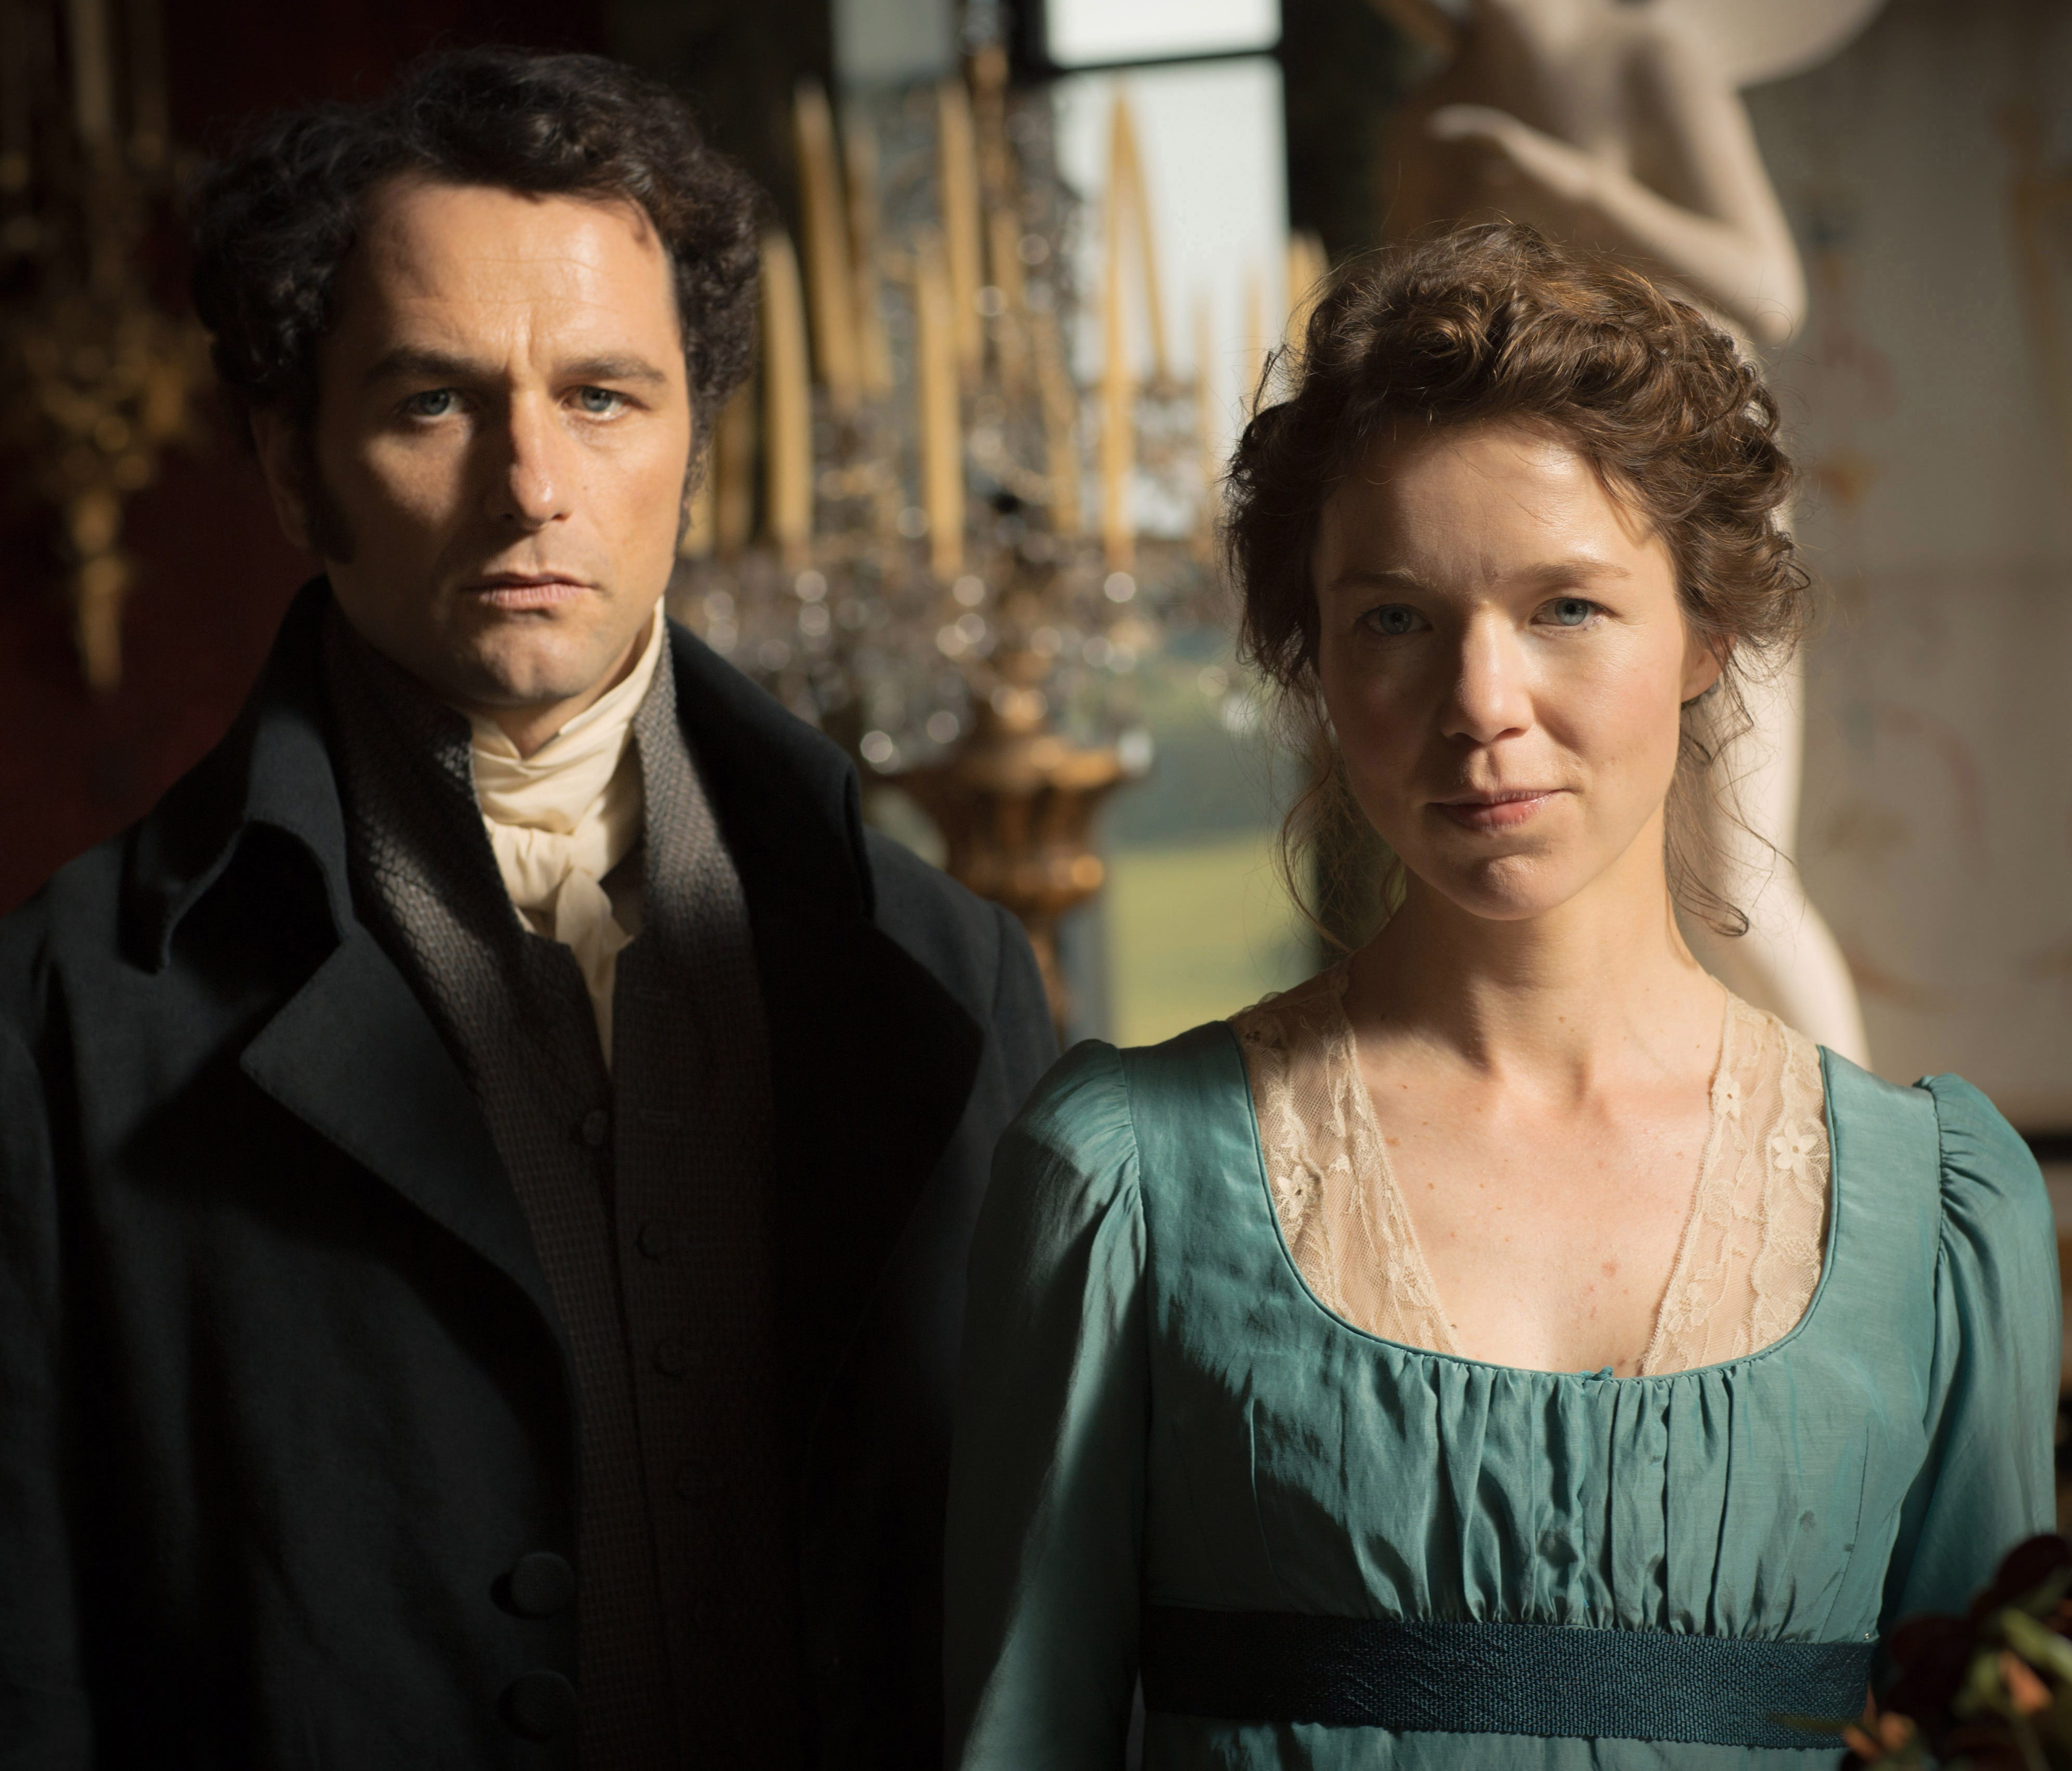 This photo provided by PBS/Masterpiece shows Matthew Rhys, left, as Darcy and Anna Maxwell Martin as Elizabeth Darcy, in 